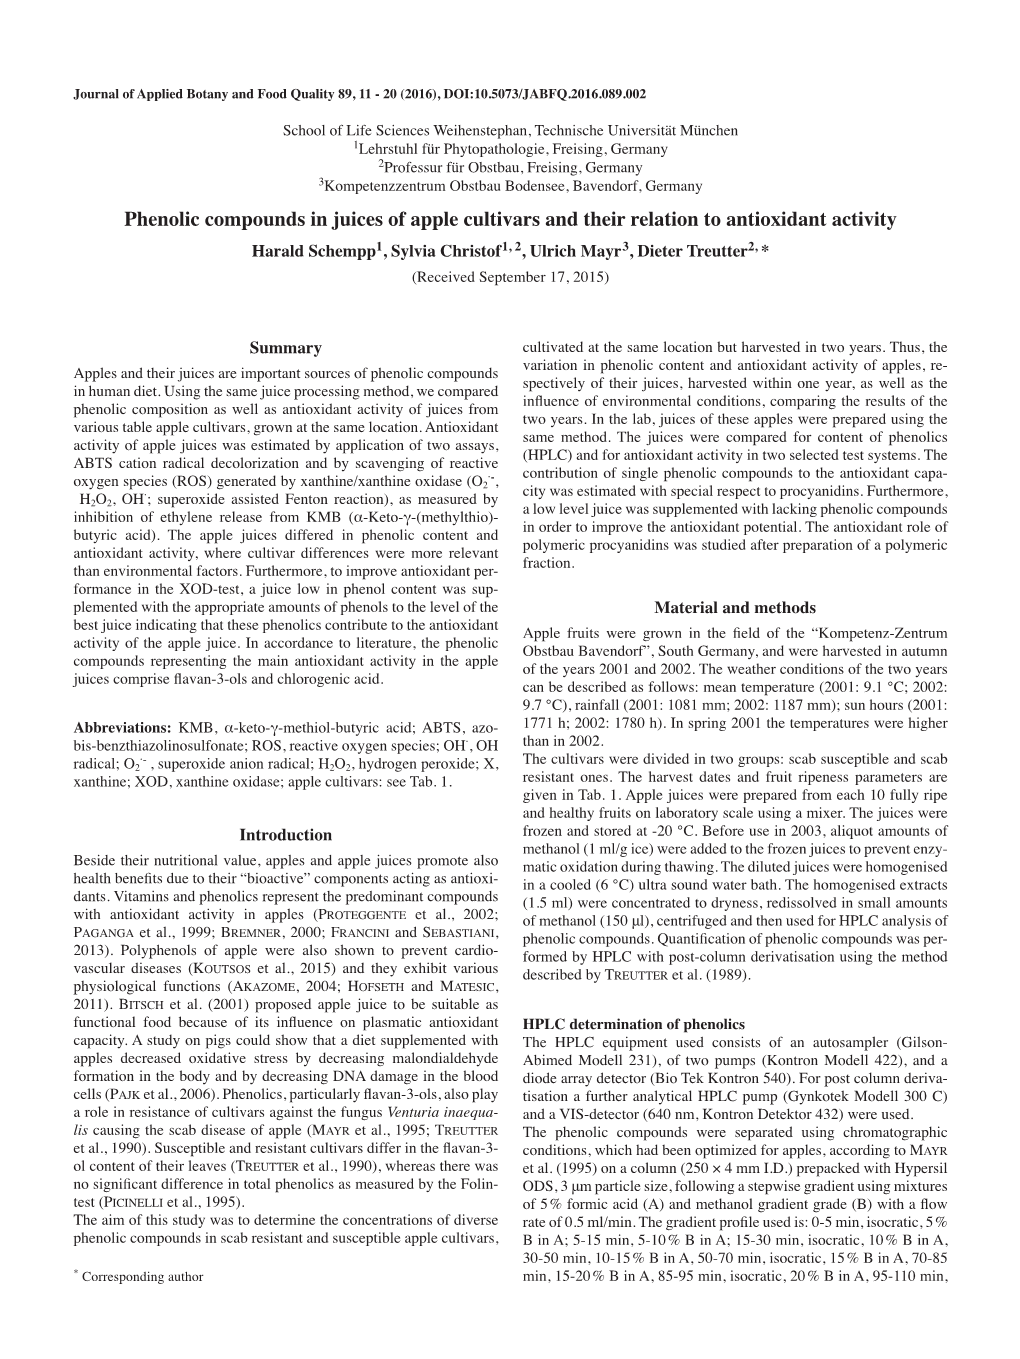 Phenolic Compounds in Juices of Apple Cultivars and Their Relation To